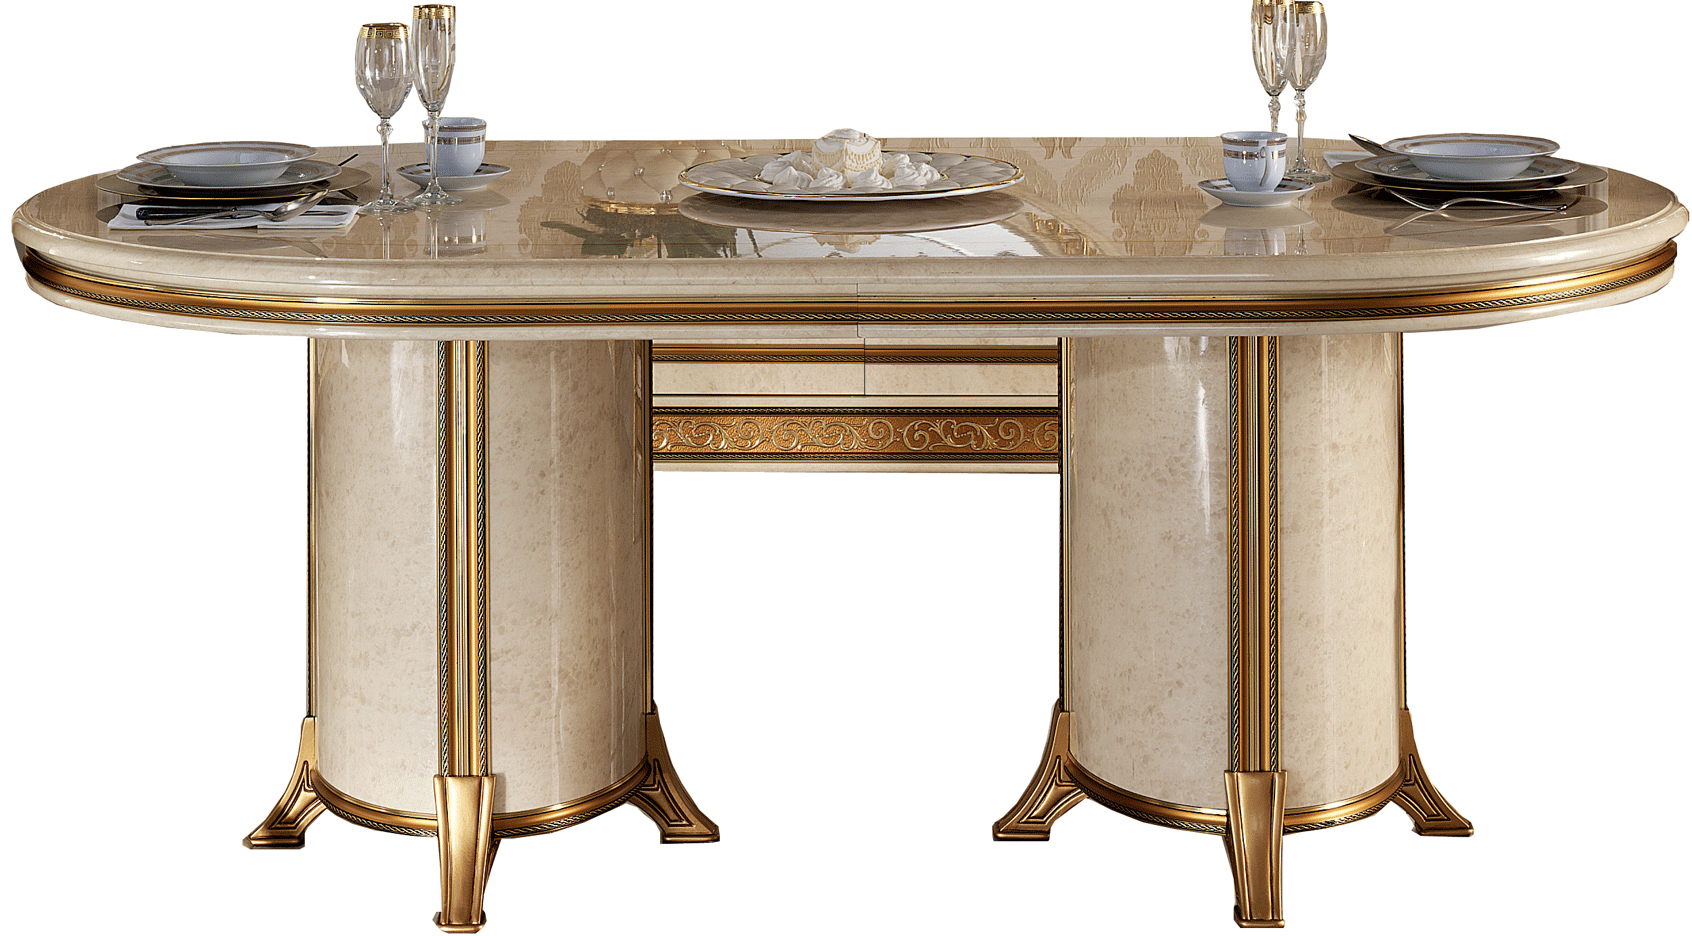 Brands Camel Gold Collection, Italy Melodia Dining Table